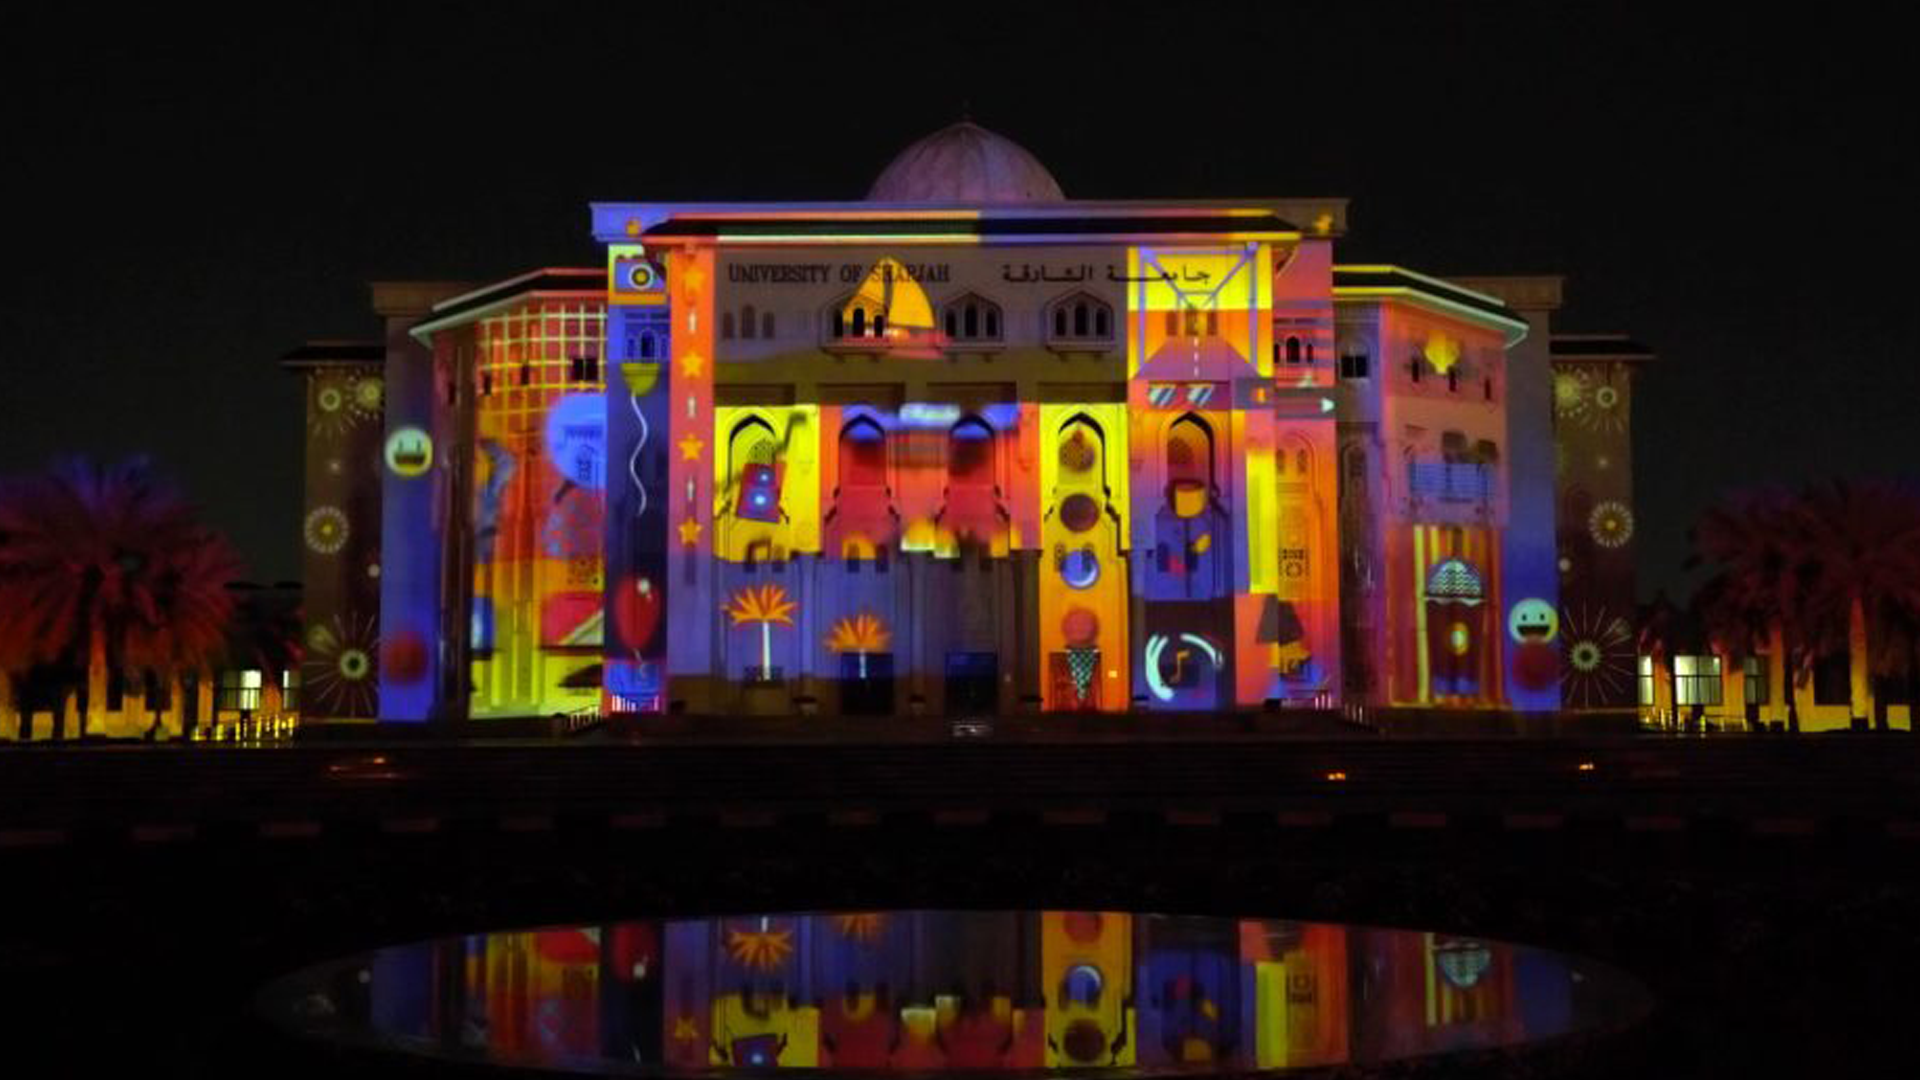 Mapping projected at the University of Sharjah inspired by the daily life of its students